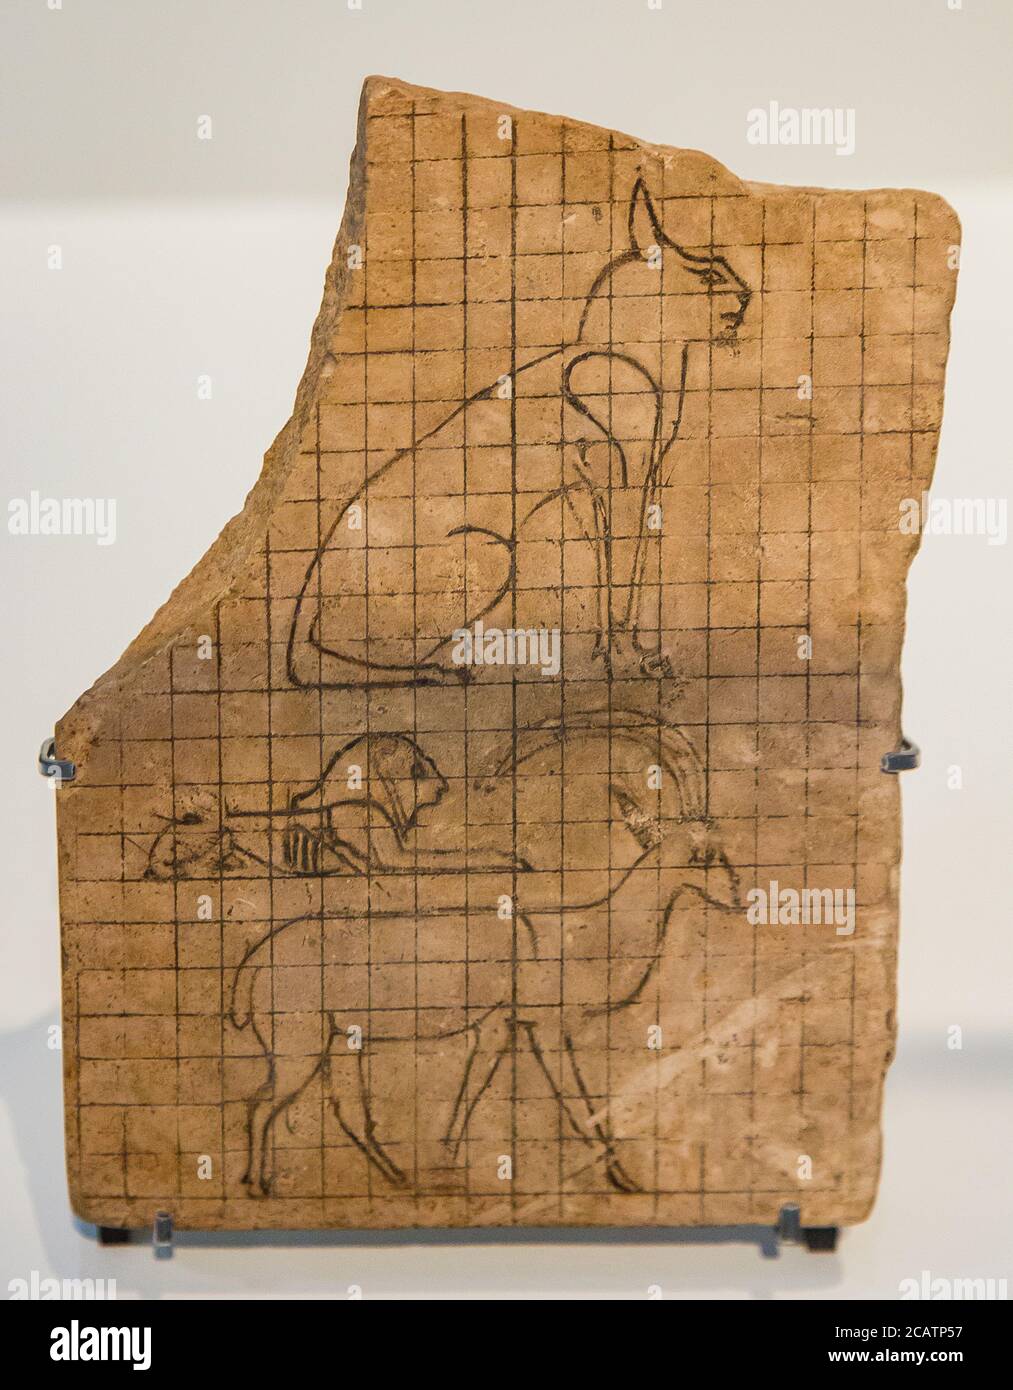 Exhibition 'The animal kingdom in Ancient Egypt', organized in 2015 by the Louvre Museum in Lens. Limestone ostracon, with a grid. Stock Photo